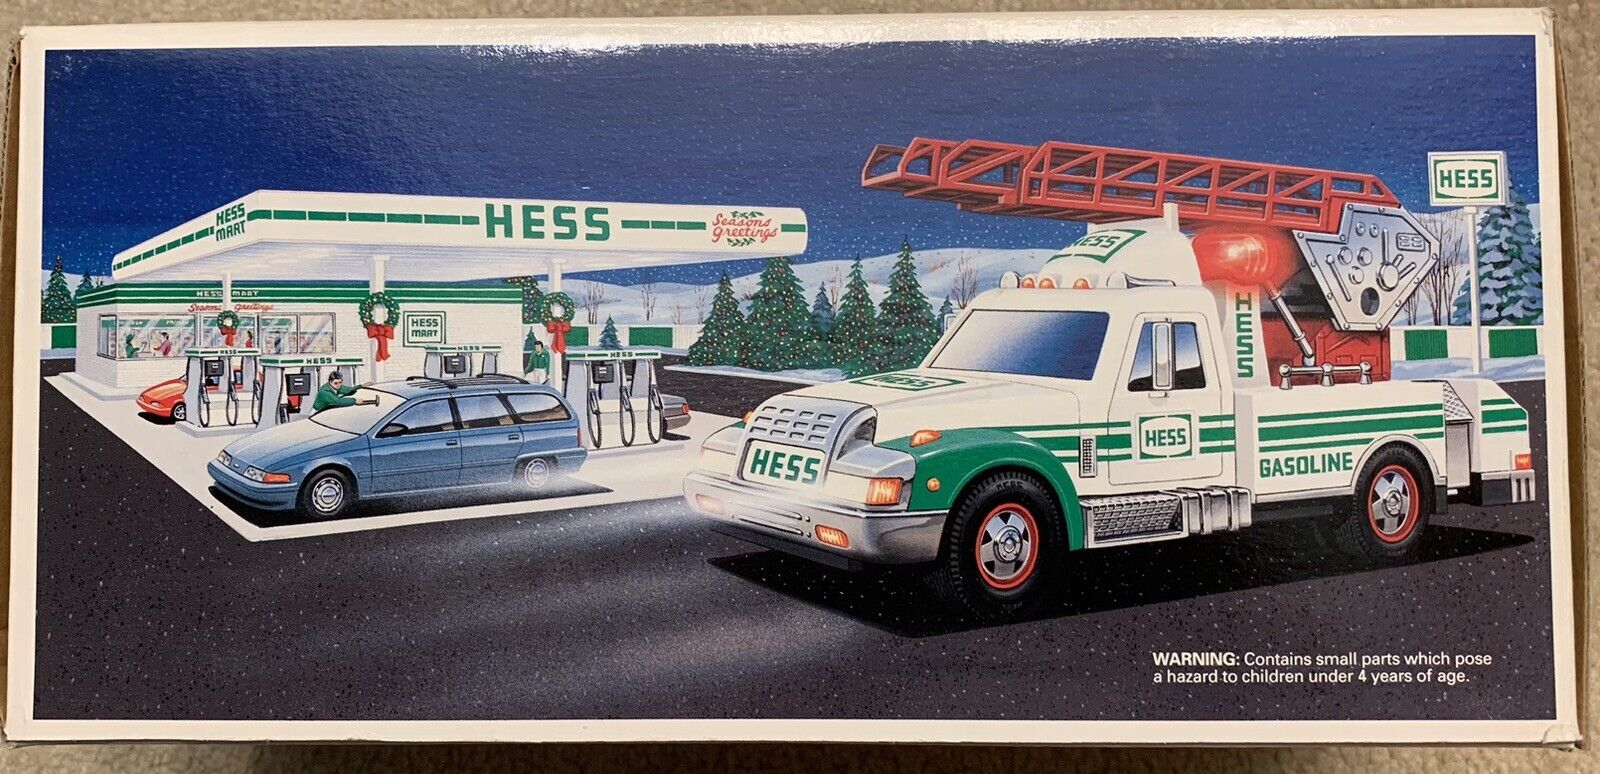 Vintage 1994 Hess Rescue Truck - New In Original Box - Never Opened